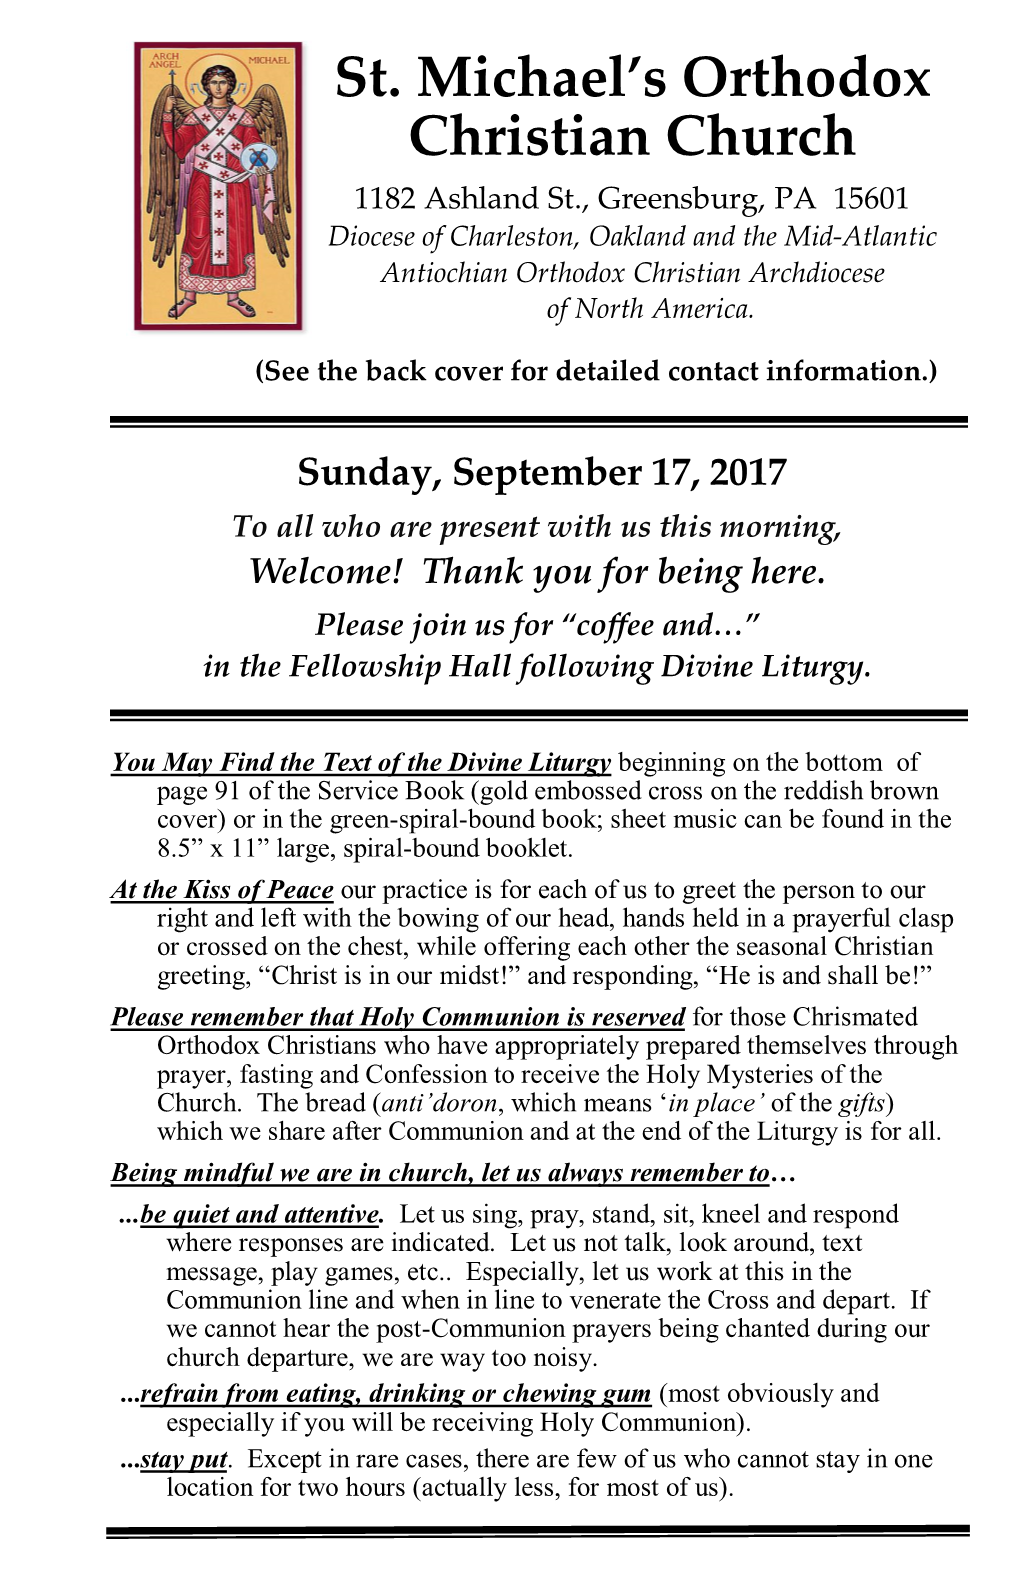 BUL 2017-09-17 (Sunday After Elevation of the Cross)